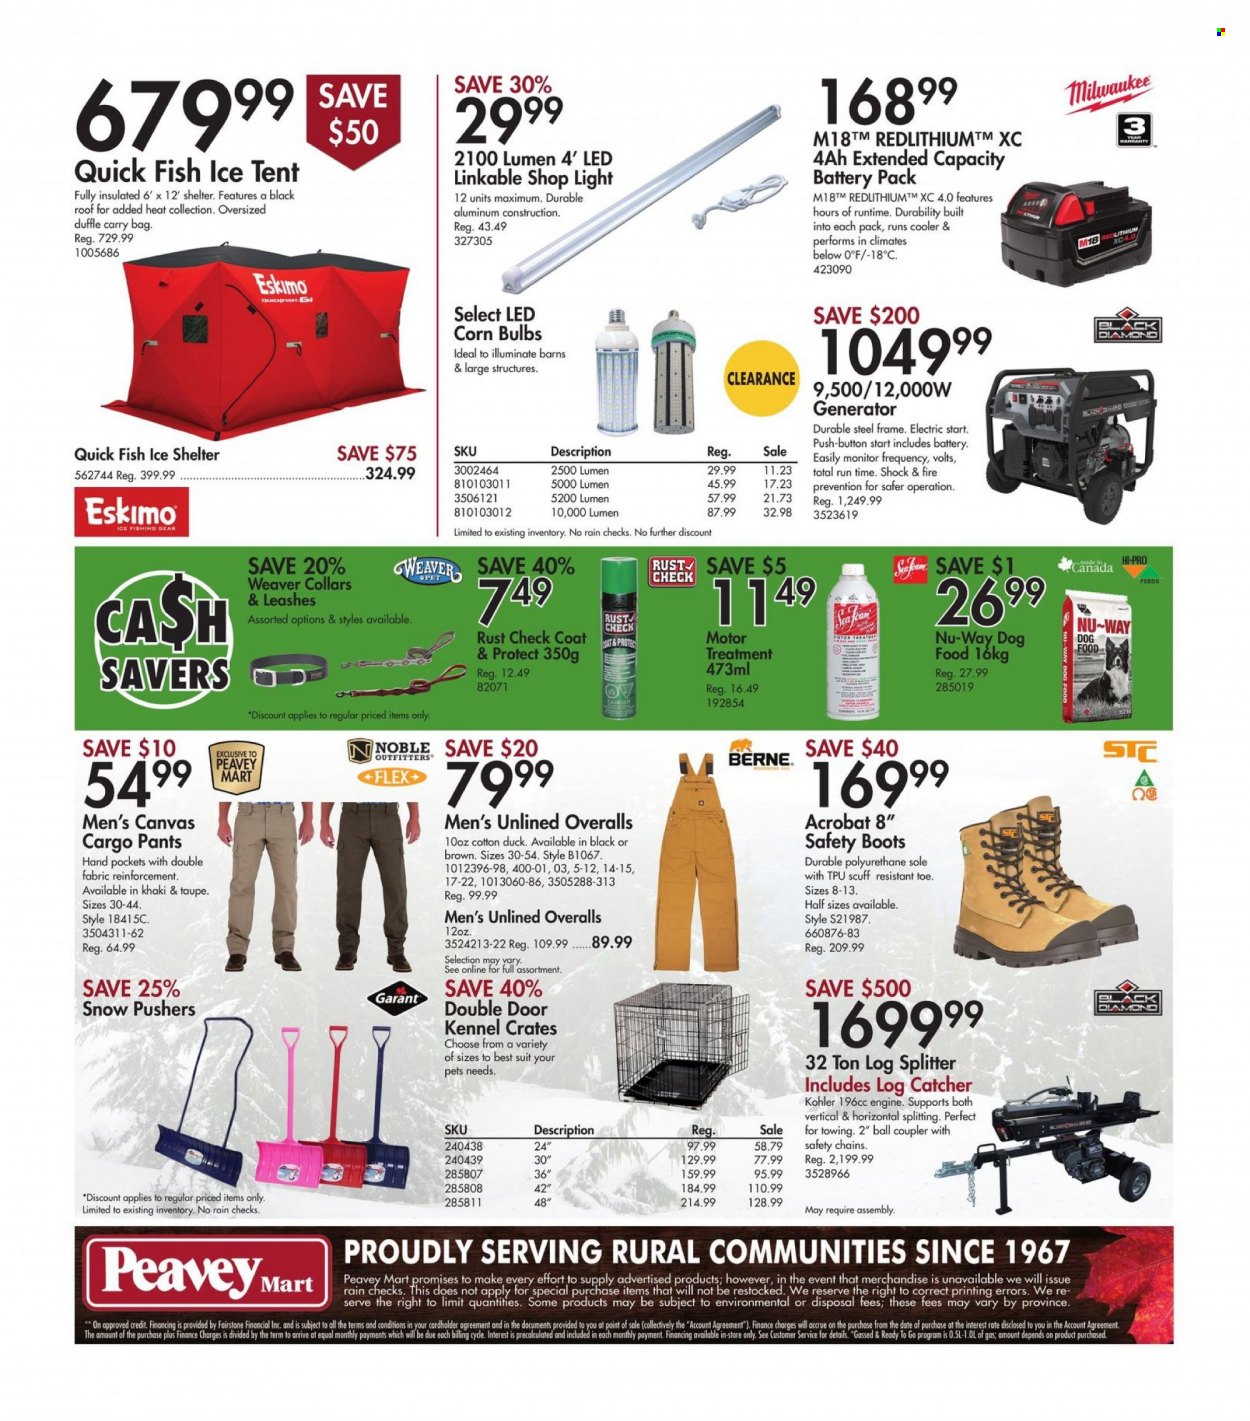 thumbnail - Peavey Mart Flyer - January 27, 2023 - February 02, 2023 - Sales products - canvas, bulb, animal food, travel dog kennel, dog food, coat, cargo pants, pants, carry bag, boots, shop light, Milwaukee, log splitter, generator, tent, ice fishing, ice shelter. Page 13.